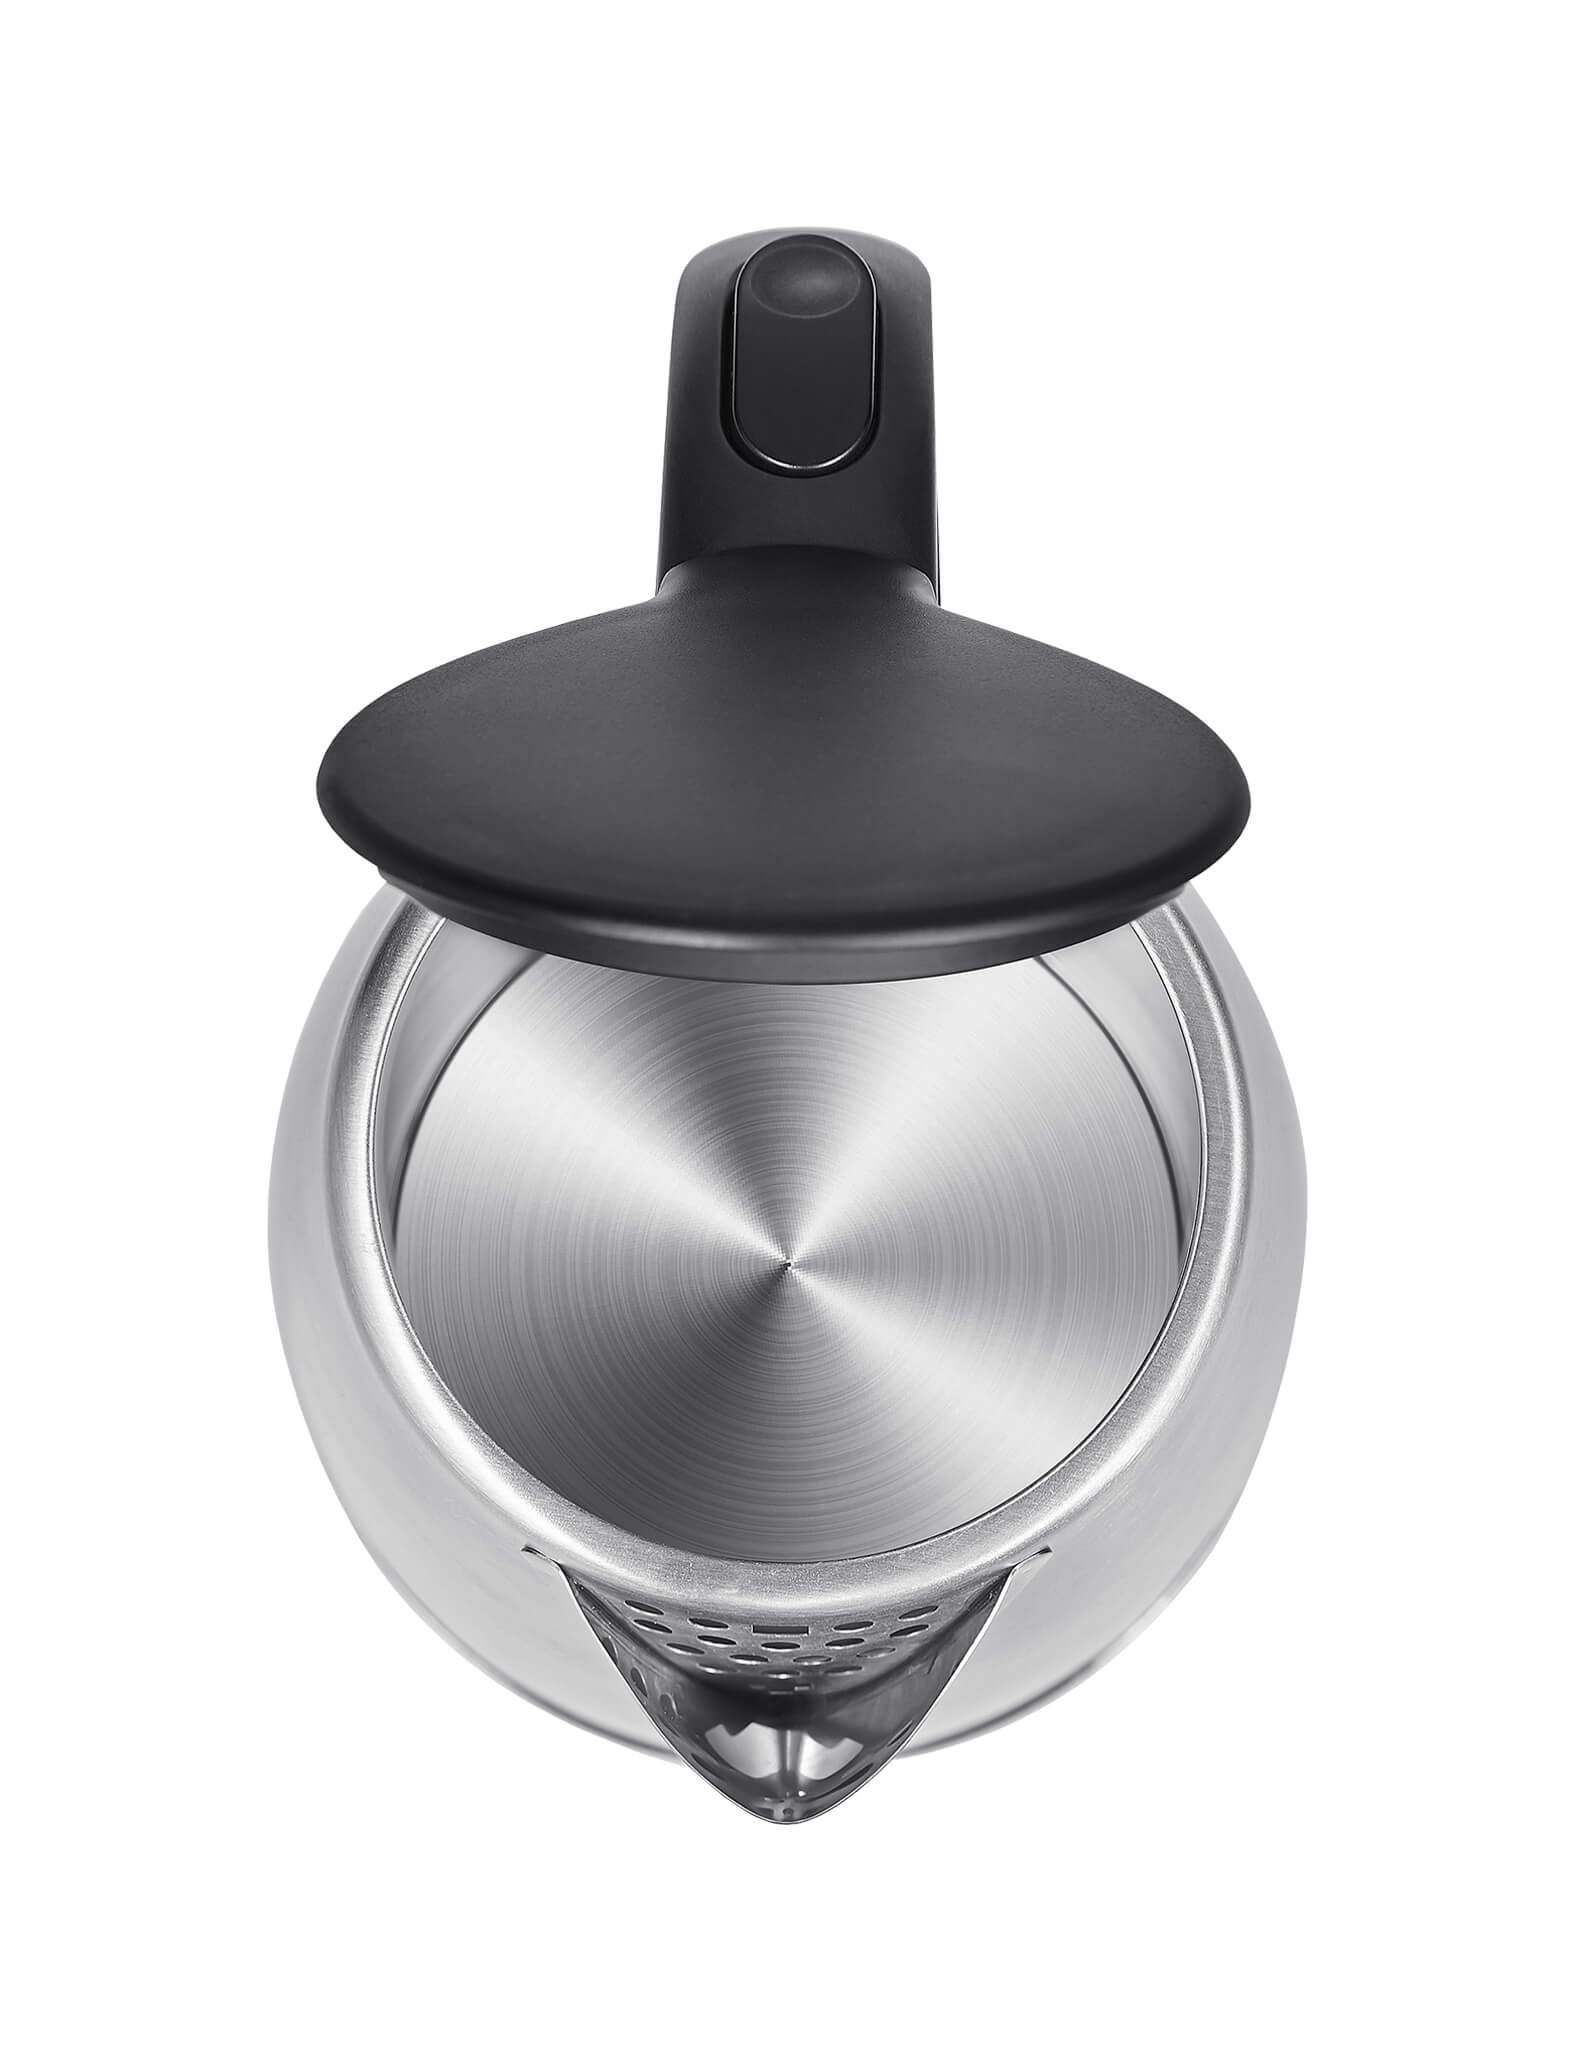 Top view of stainless steel comfee tea kettle